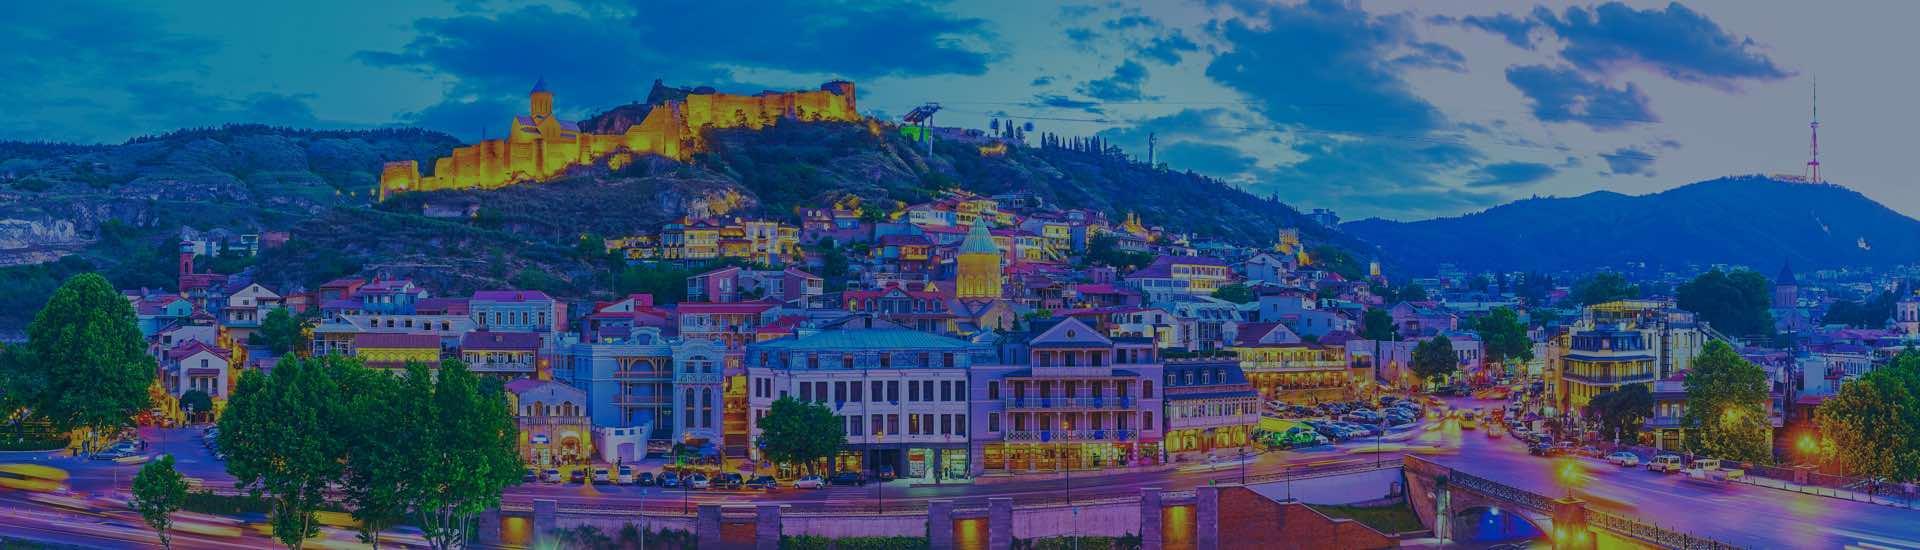 Search Hotels in Tbilisi